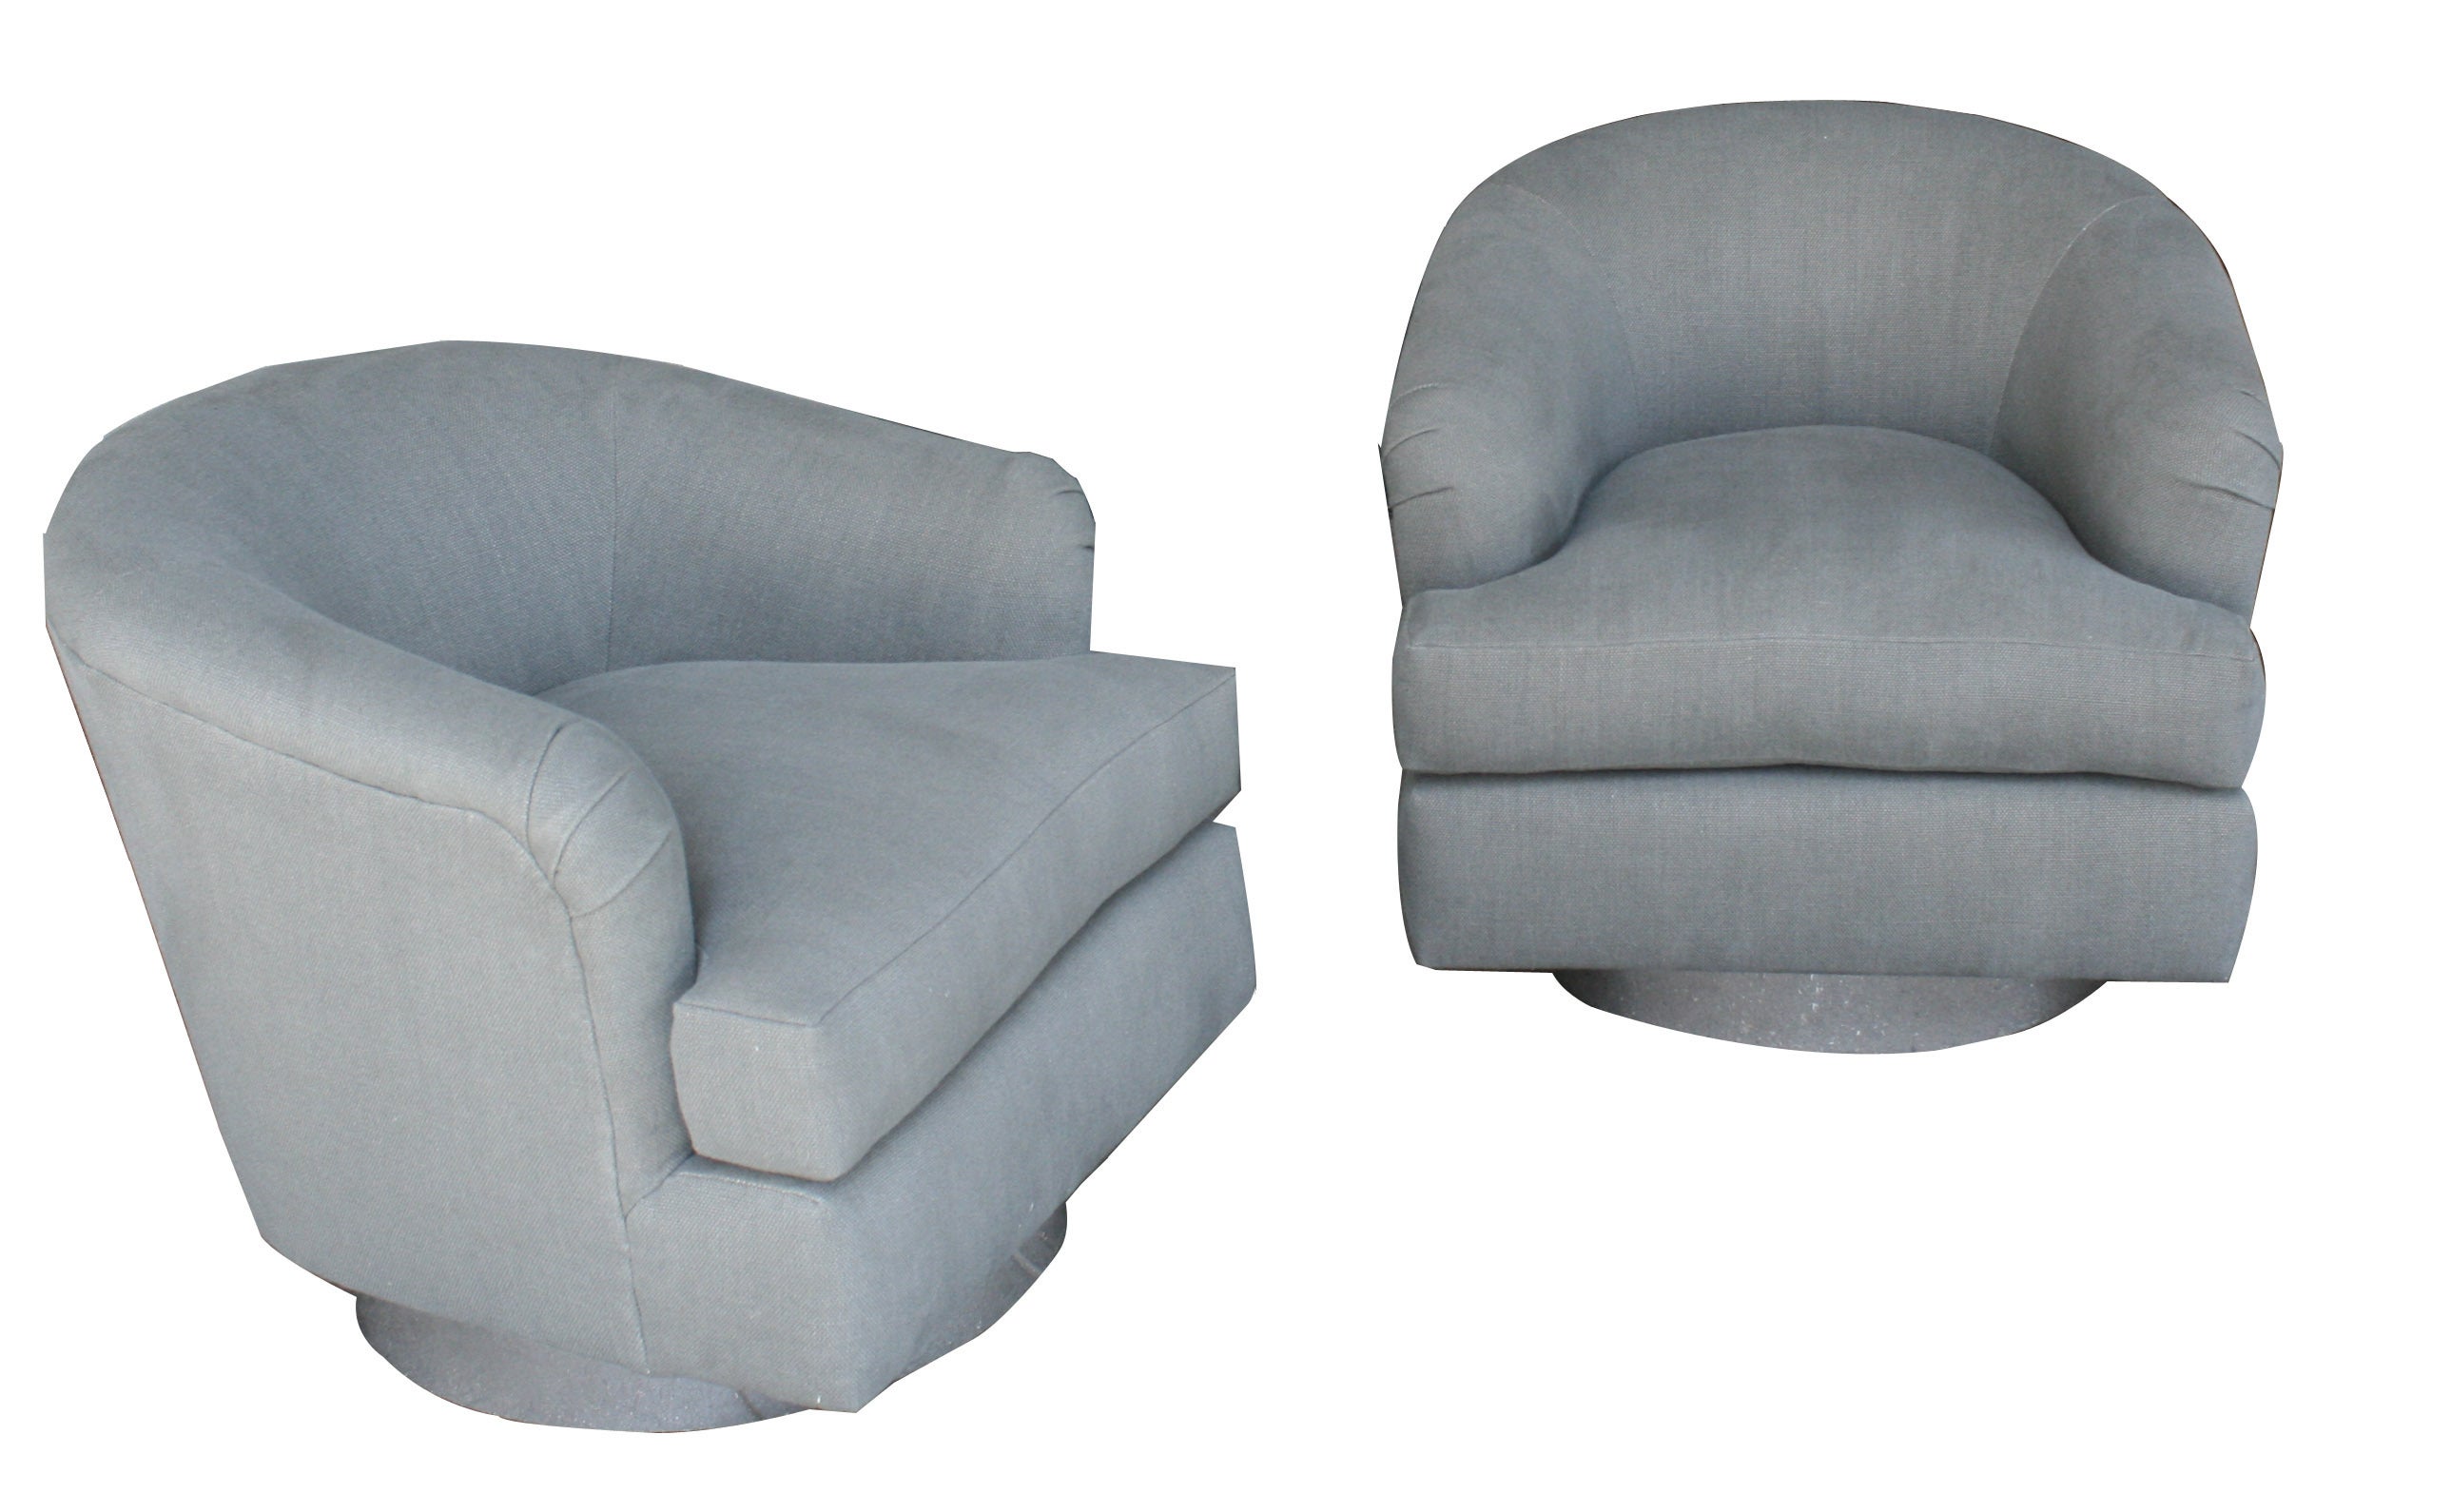 A Pair of Swivel Chairs in Linen by Milo Baughman, USA, ca. 1970s.